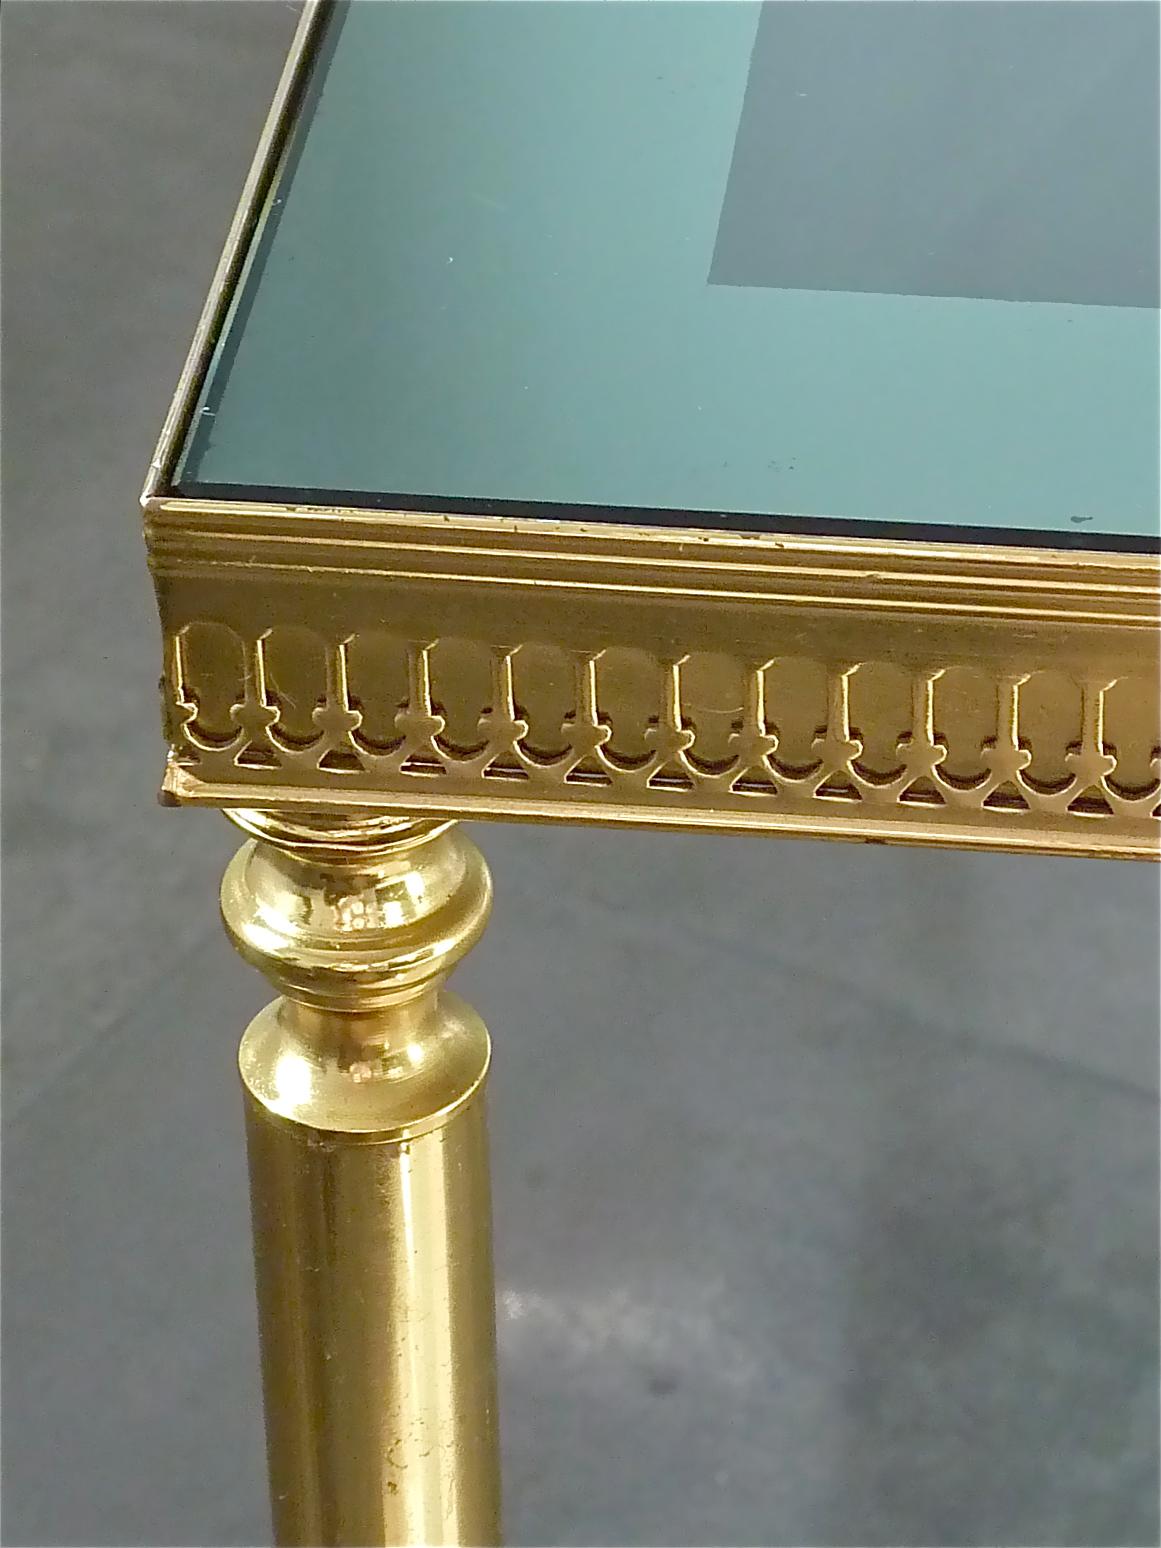 French Midcentury Maison Baguès Jansen Couch Sofa Table Brass Mirror Glass 1950s For Sale 6